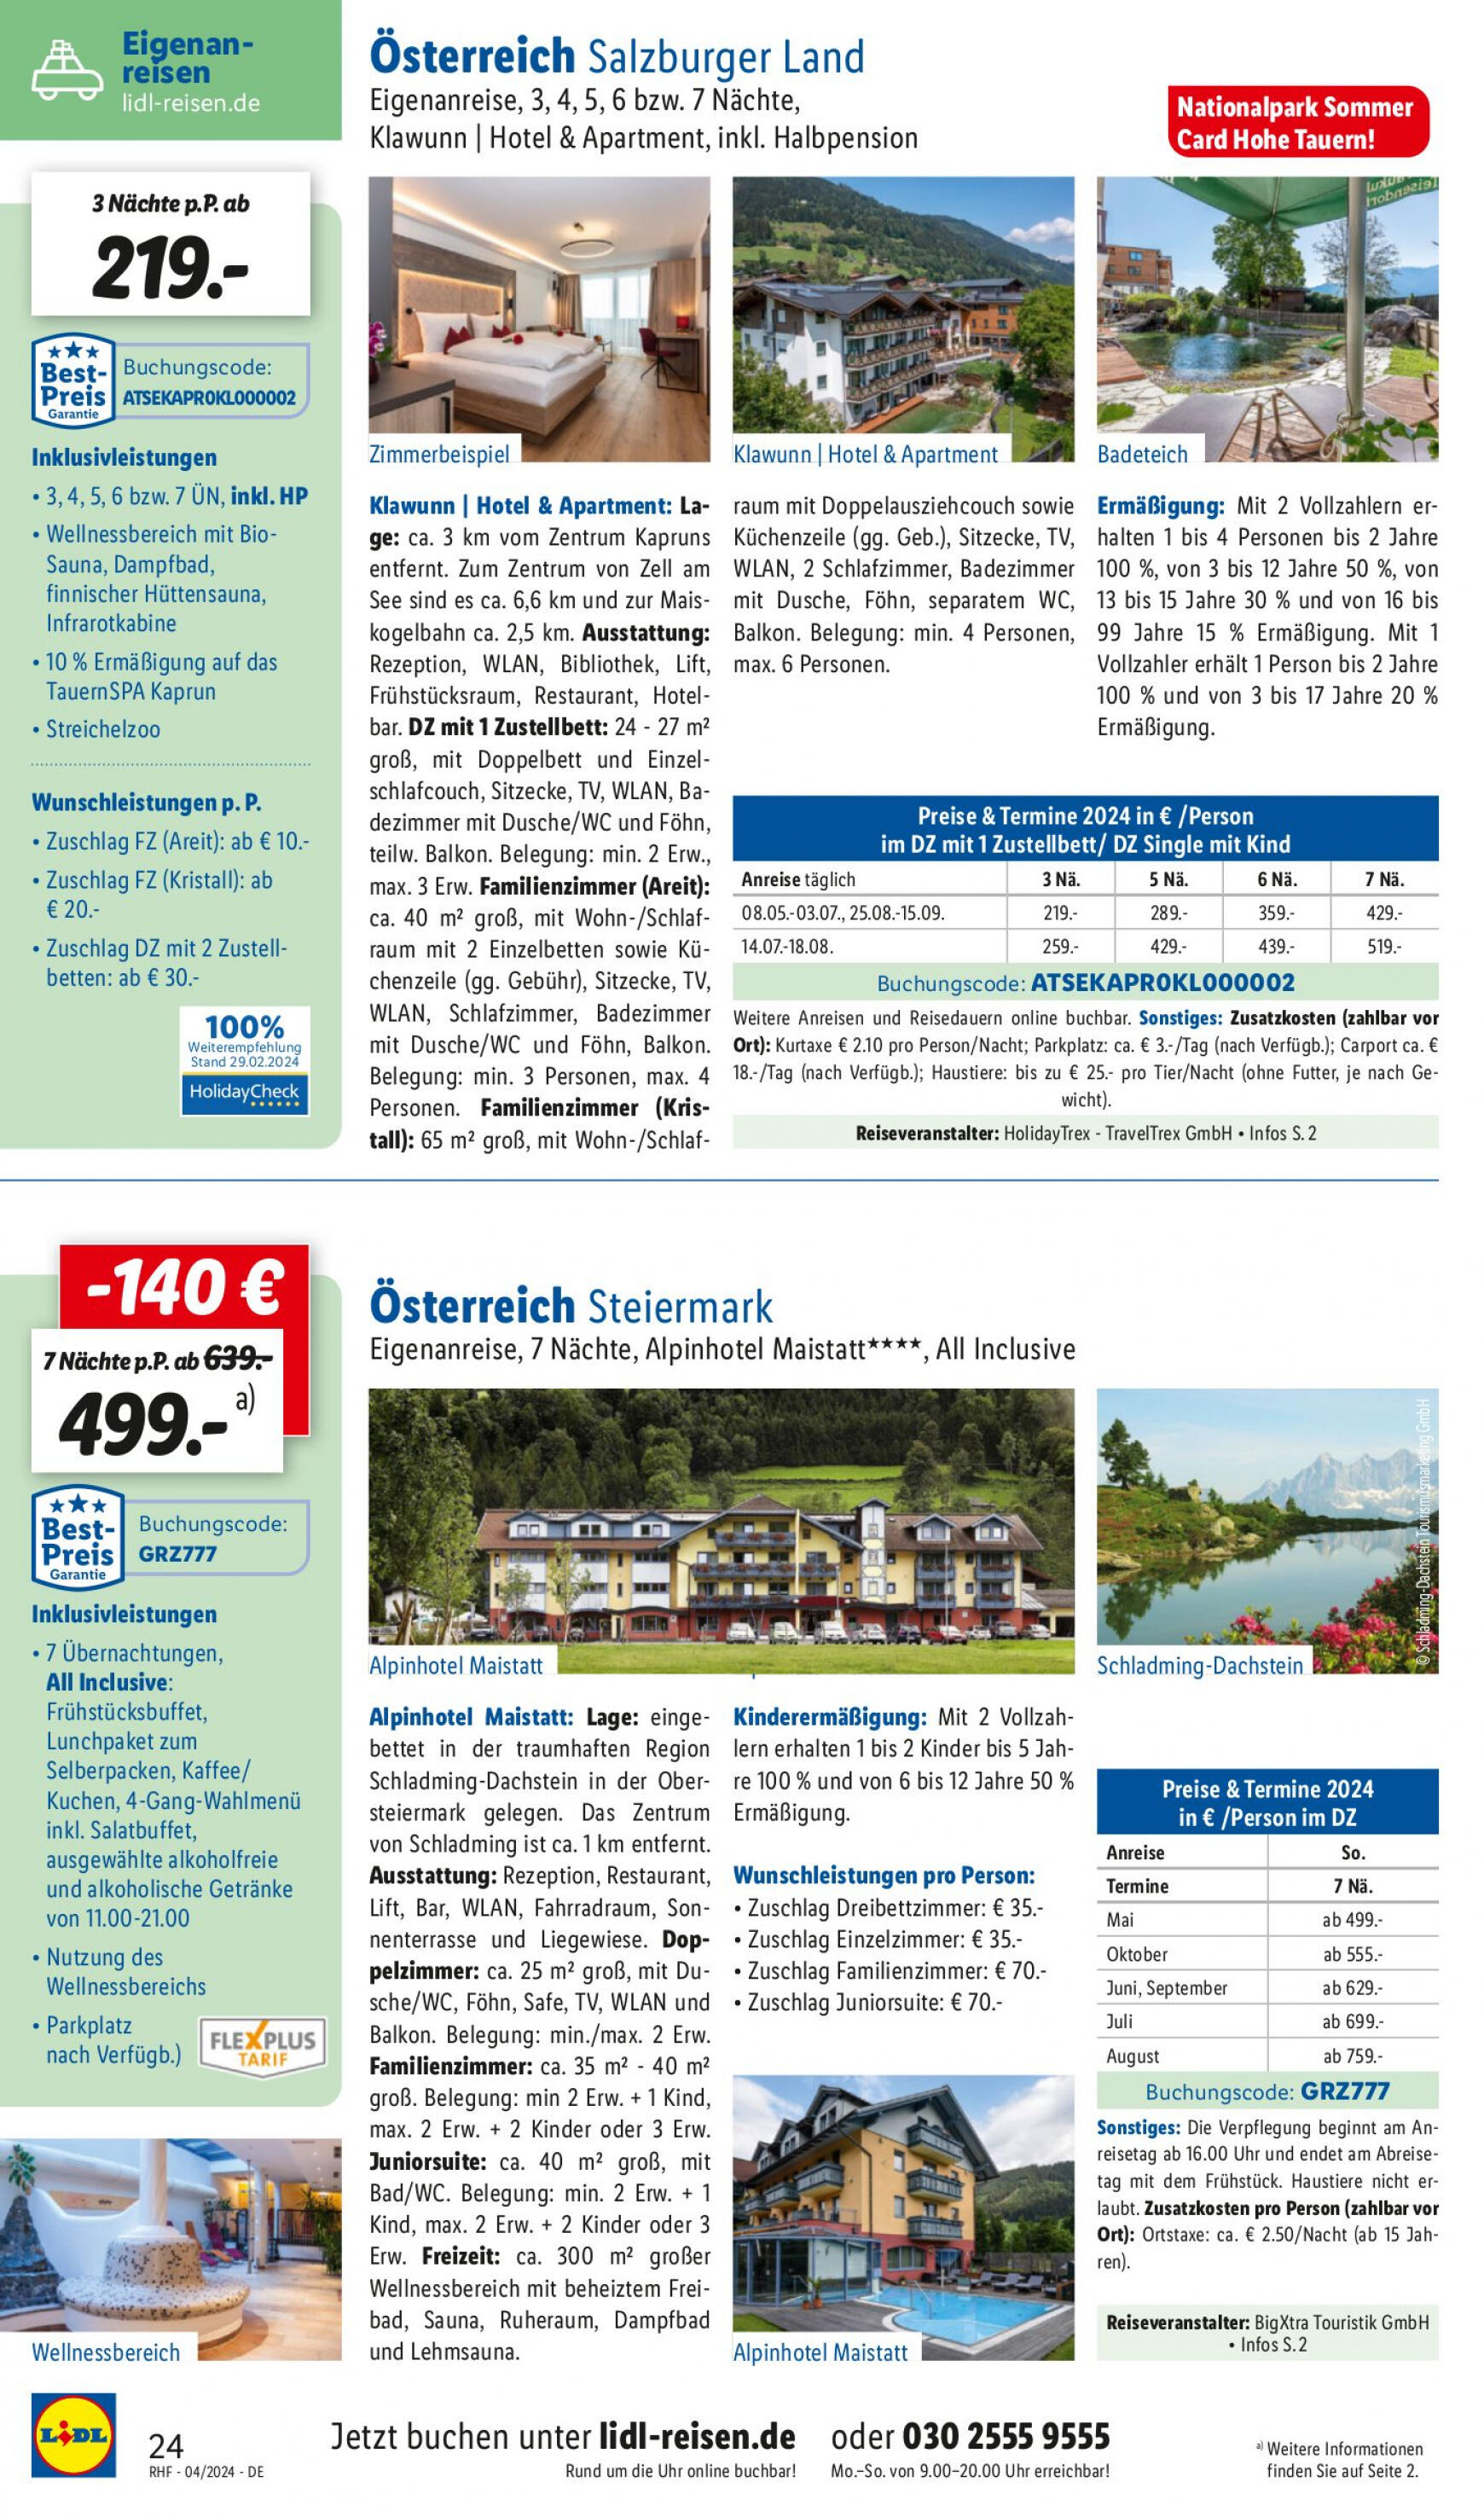 lidl - Flyer Lidl - April Reise-Highlights aktuell 27.03. - 30.04. - page: 24